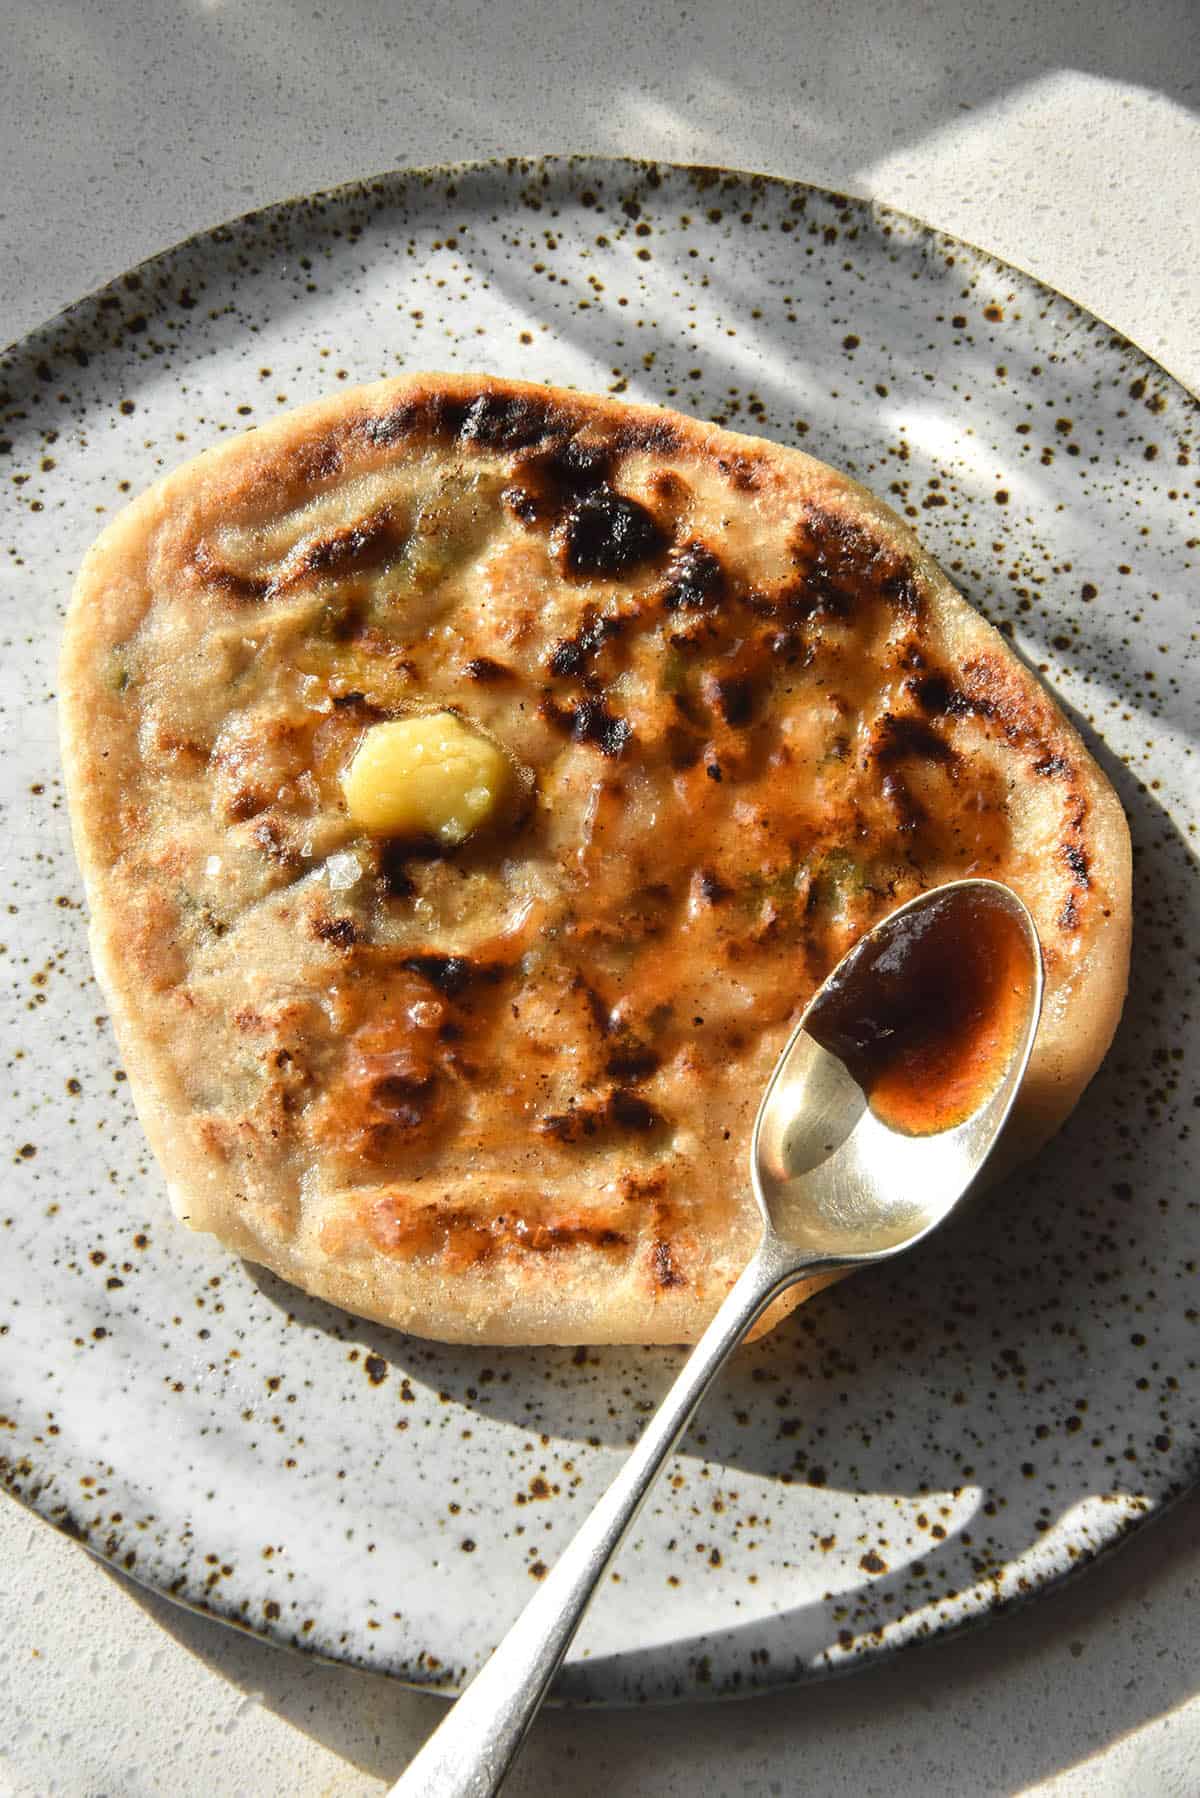 An aerial image of a gluten free Aloo paratha on a white speckled ceramic plate in bright sunlight. Some garlic infused ghee melts on the flatbread and a spoon of tamarind chutney rests on the bottom half of the plate.